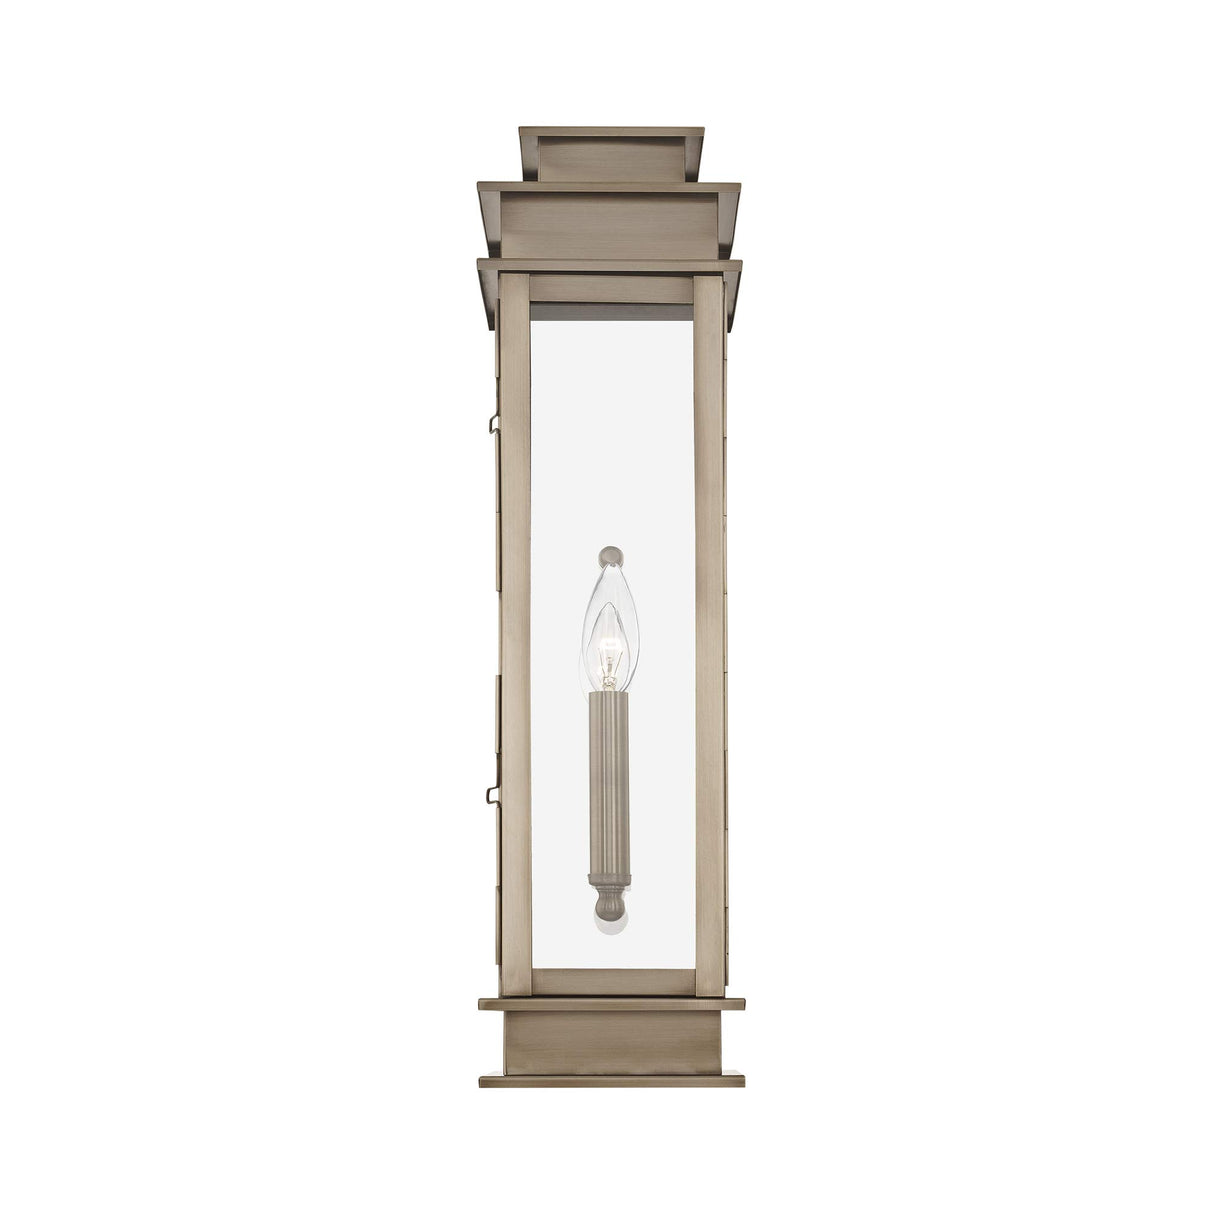 Livex Lighting 20207-29 Transitional One Light Outdoor Wall Lantern from Princeton Collection in Pwt, Nckl, B/S, Slvr. Finish, Vintage Pewter